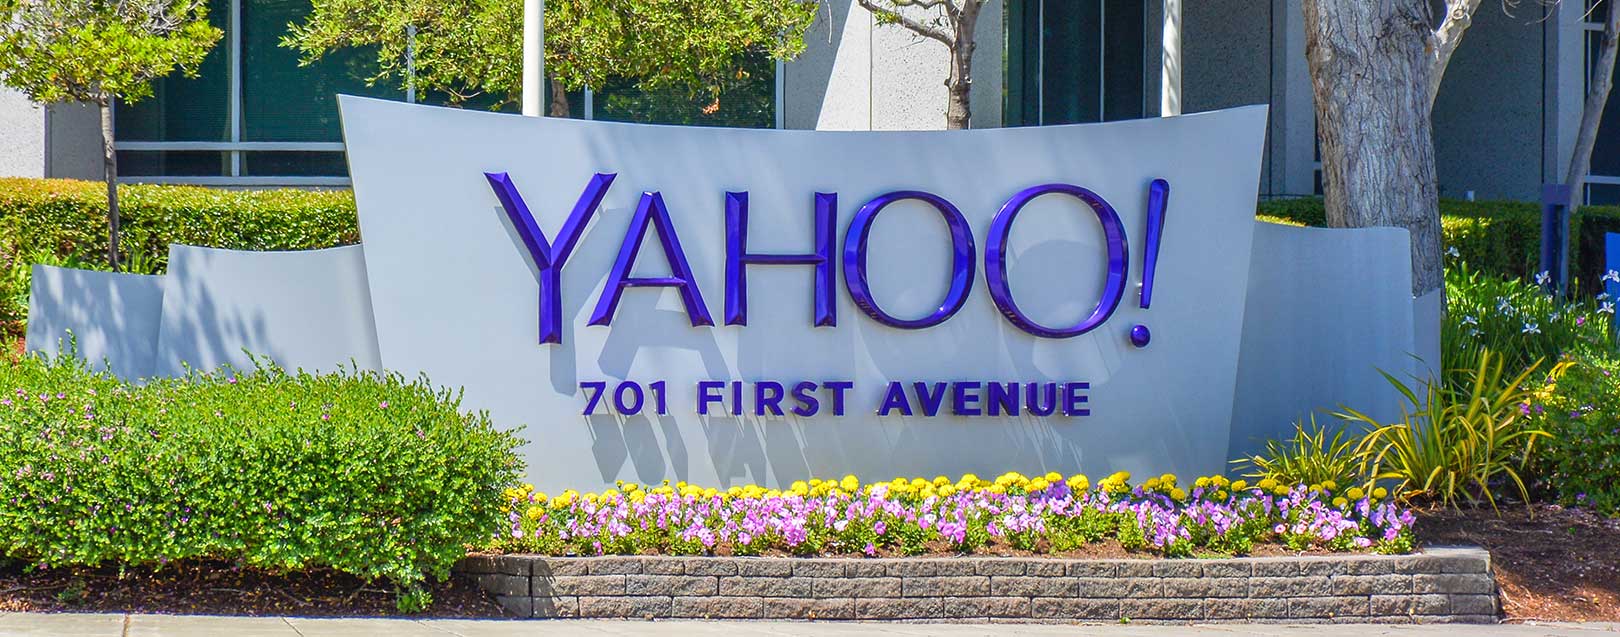 Yahoo inks $4.8bn deal with Verizon for core business